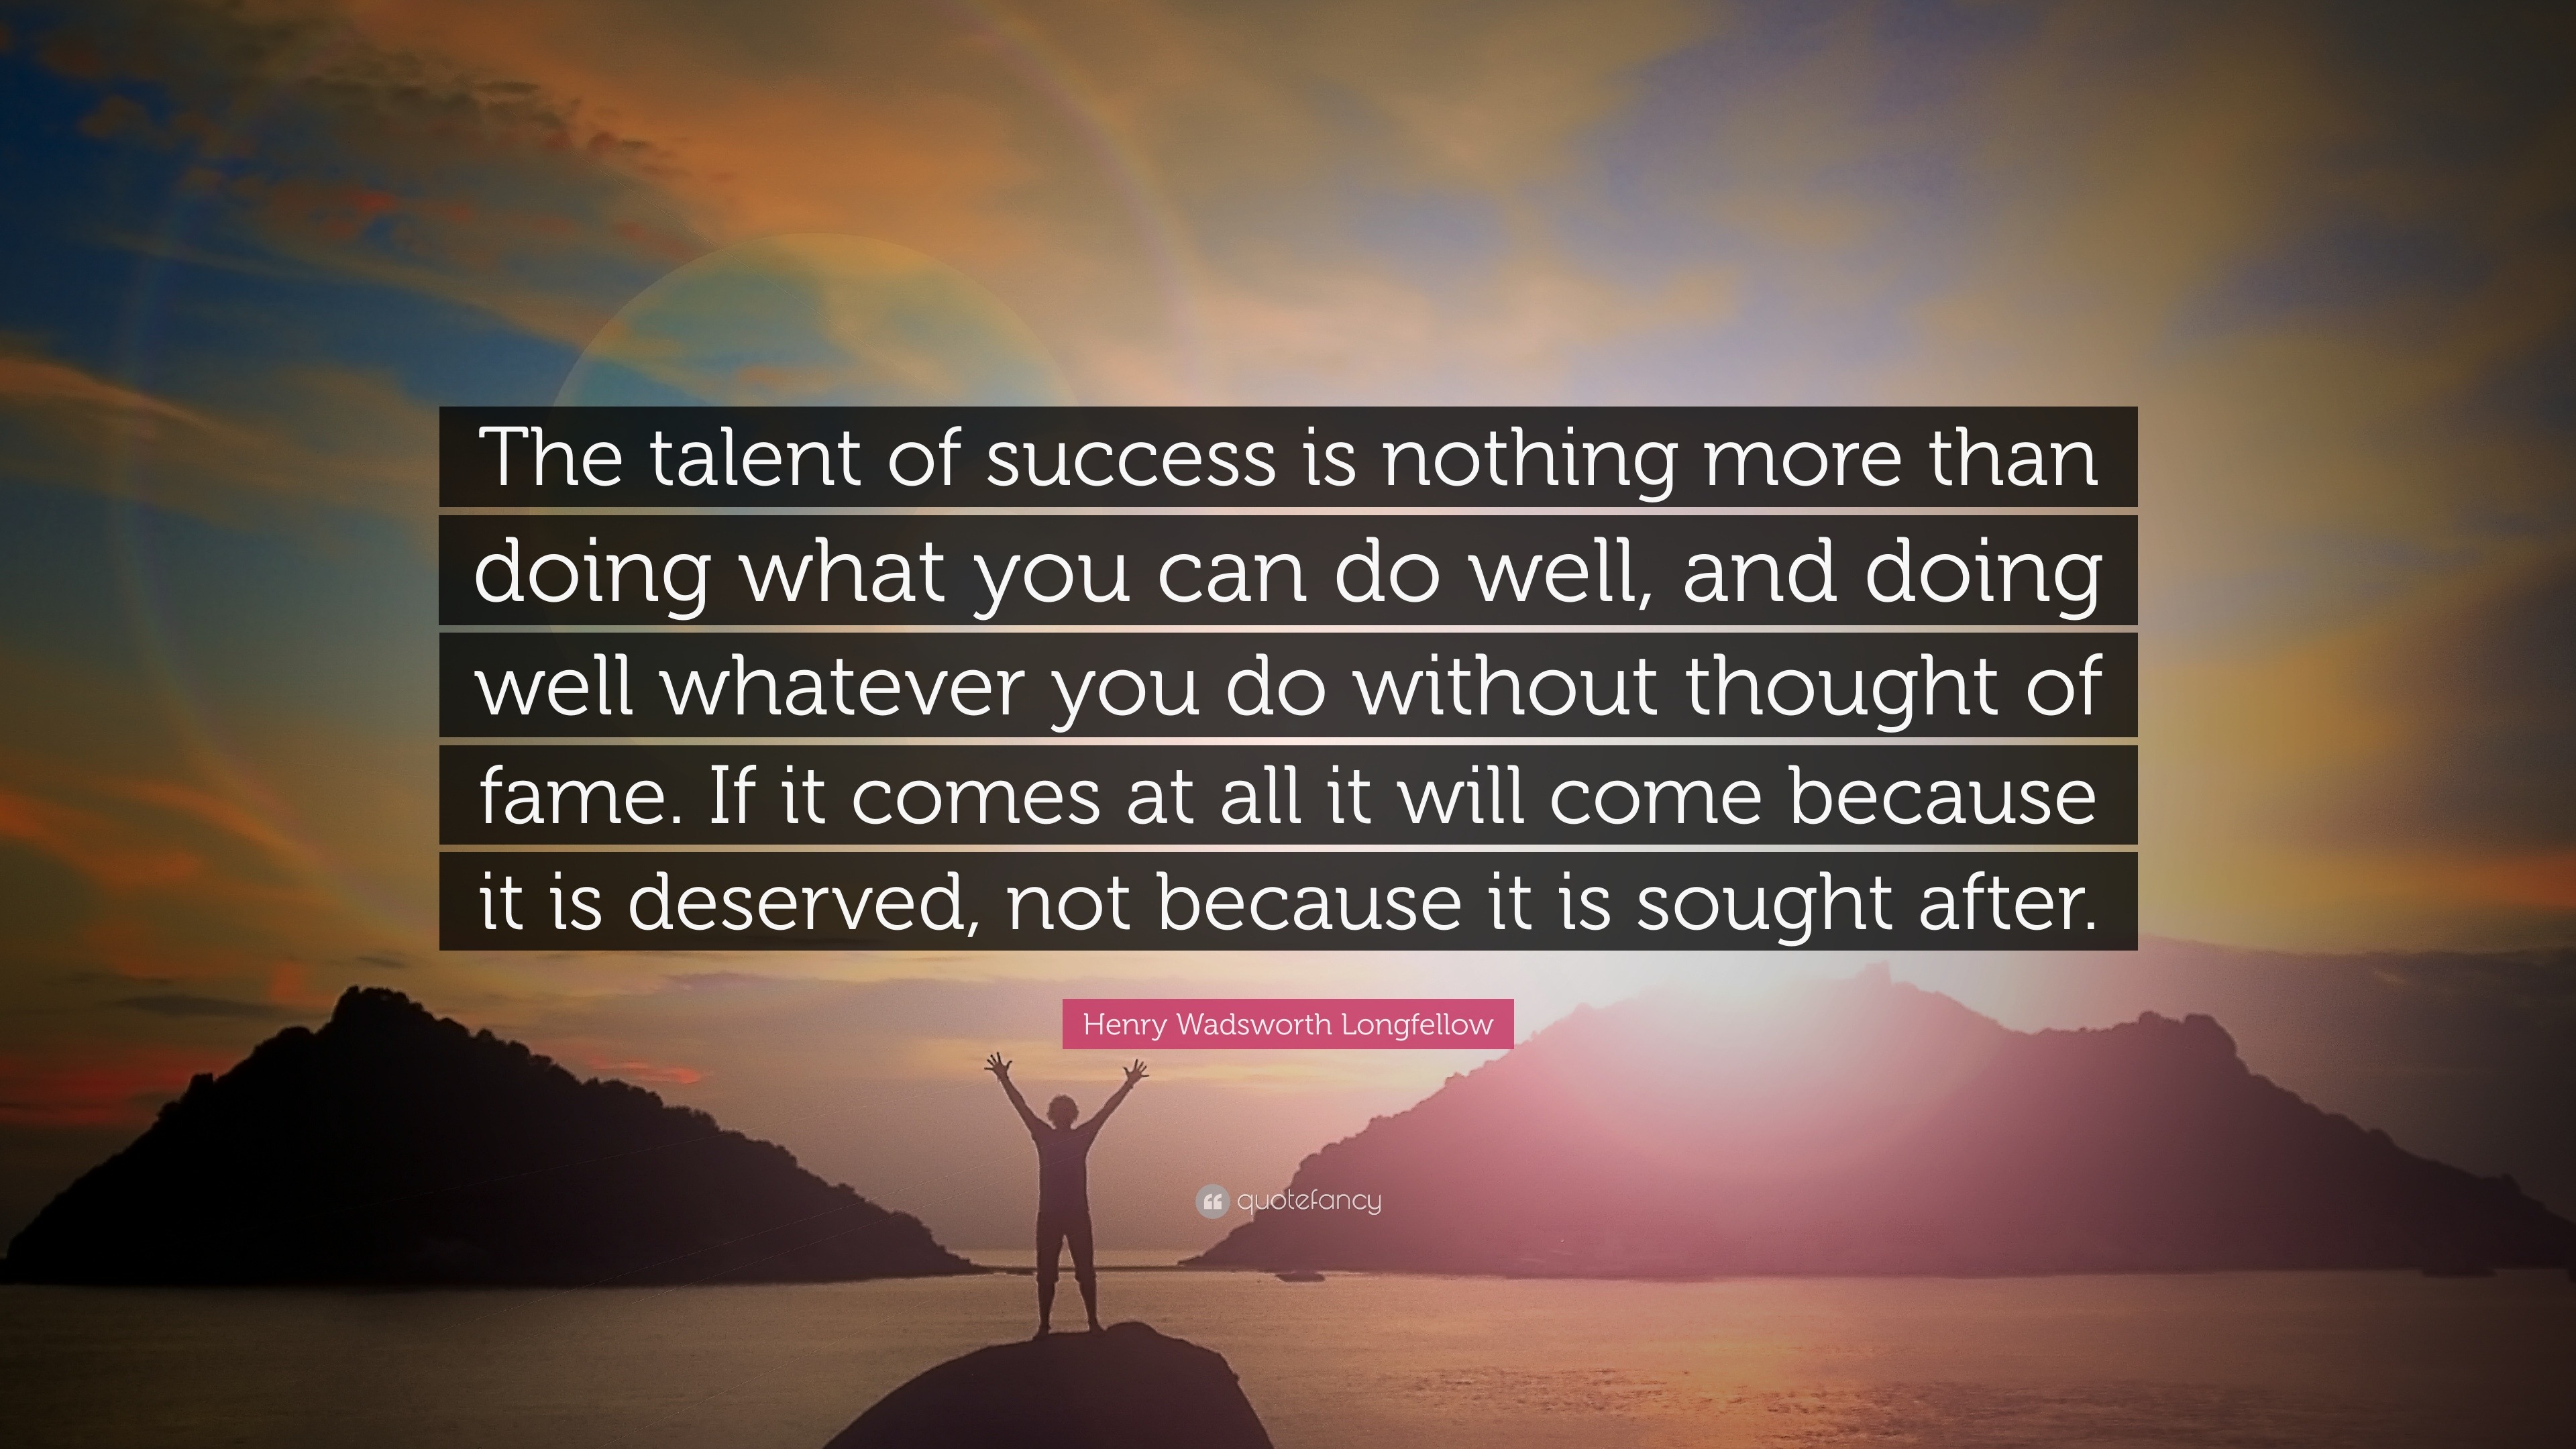 Henry Wadsworth Longfellow Quote: “The talent of success is nothing ...